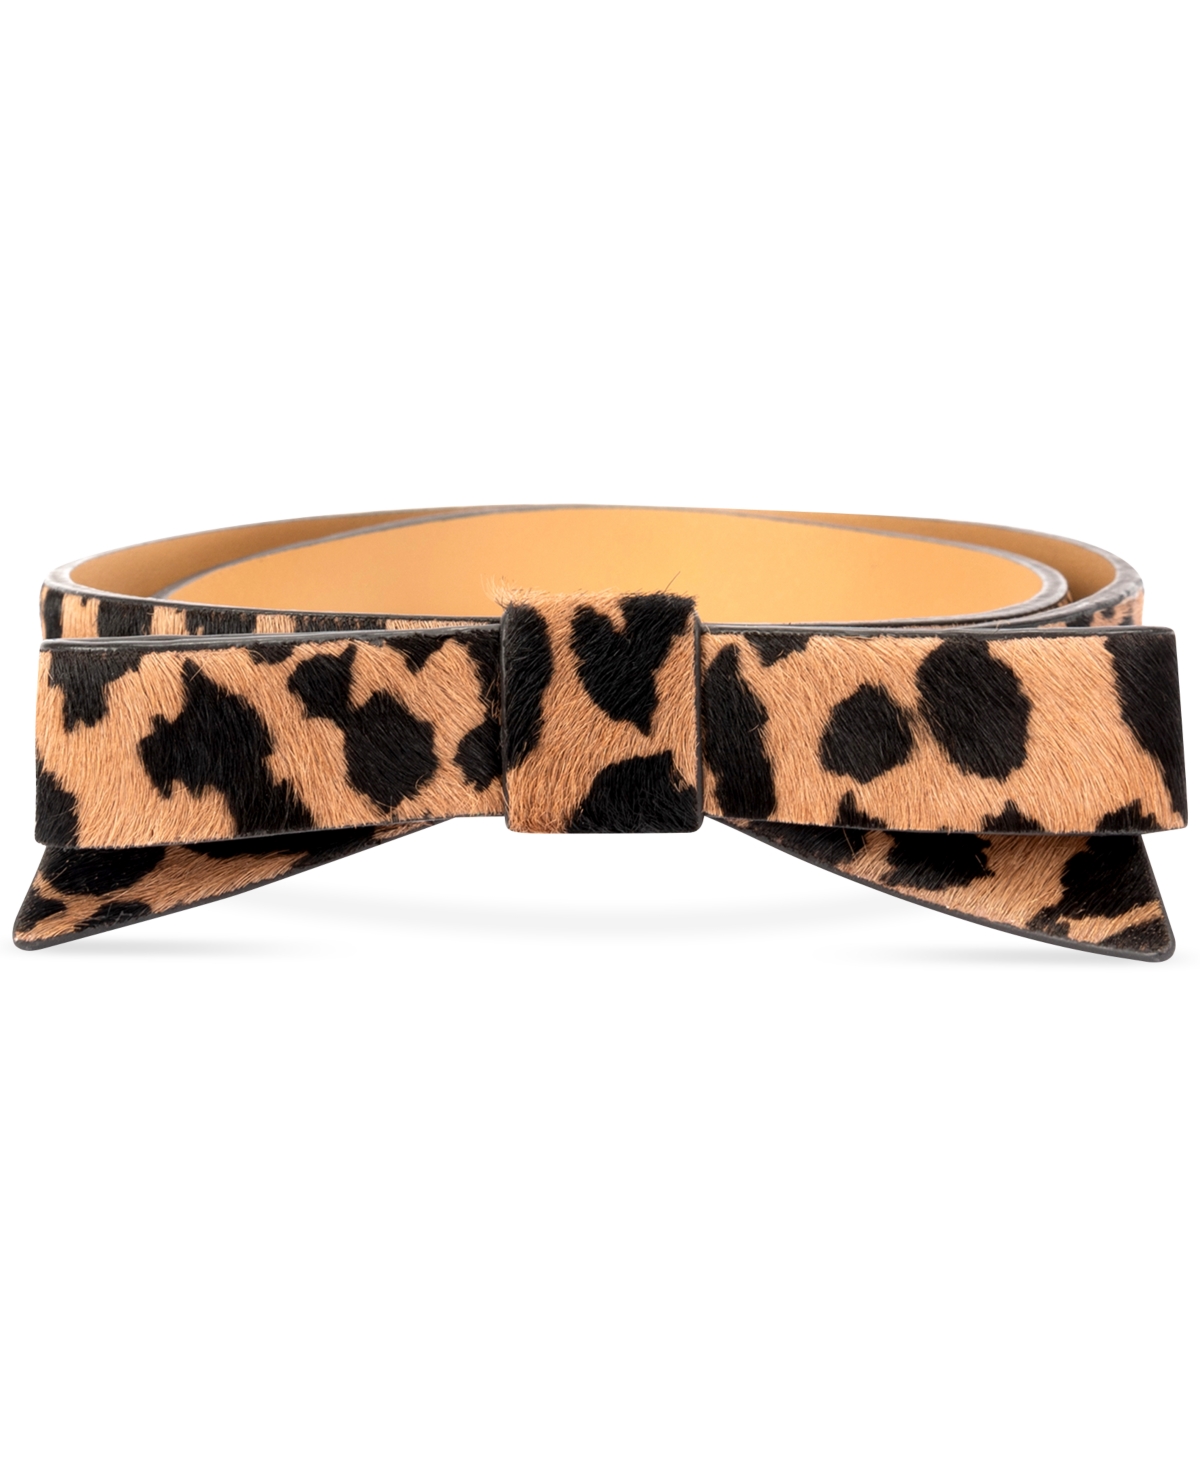 Women's Spotted Haircalf Bow Belt - Tobacco/black